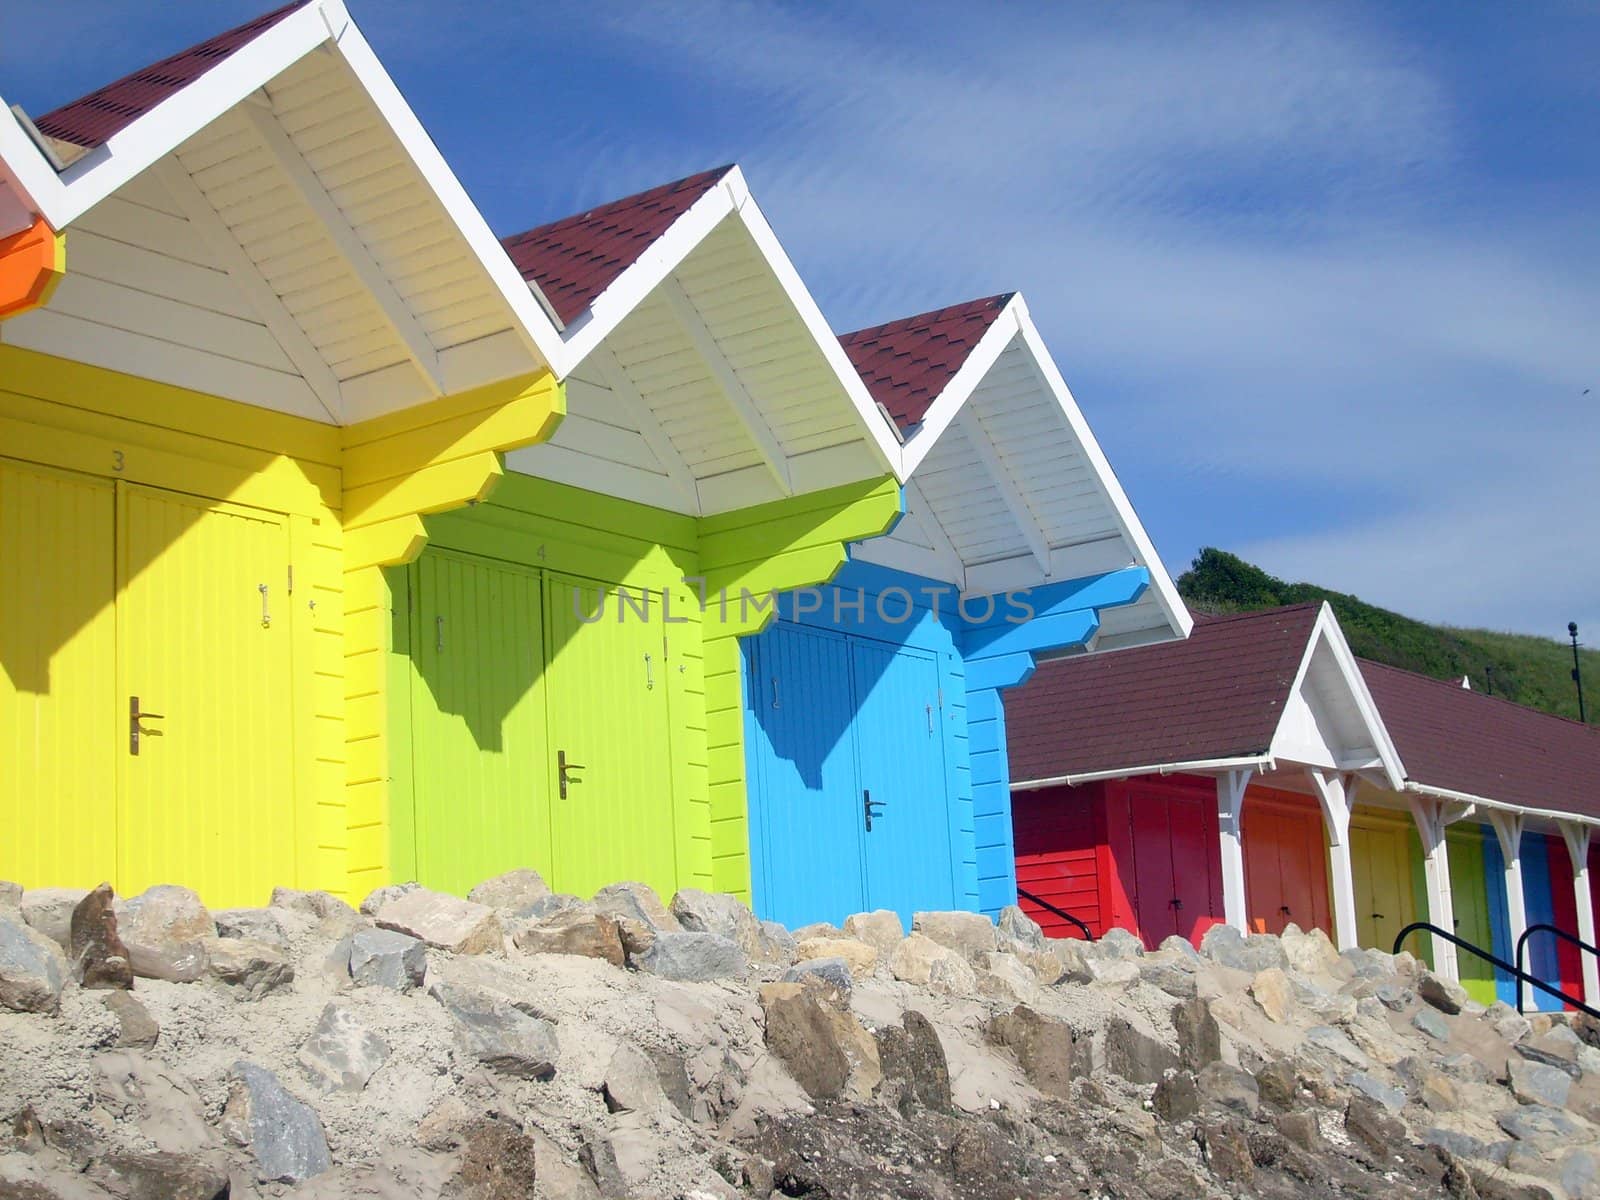 Exteriors of beautiful bright seaside beach chalets, Scarborough, England.